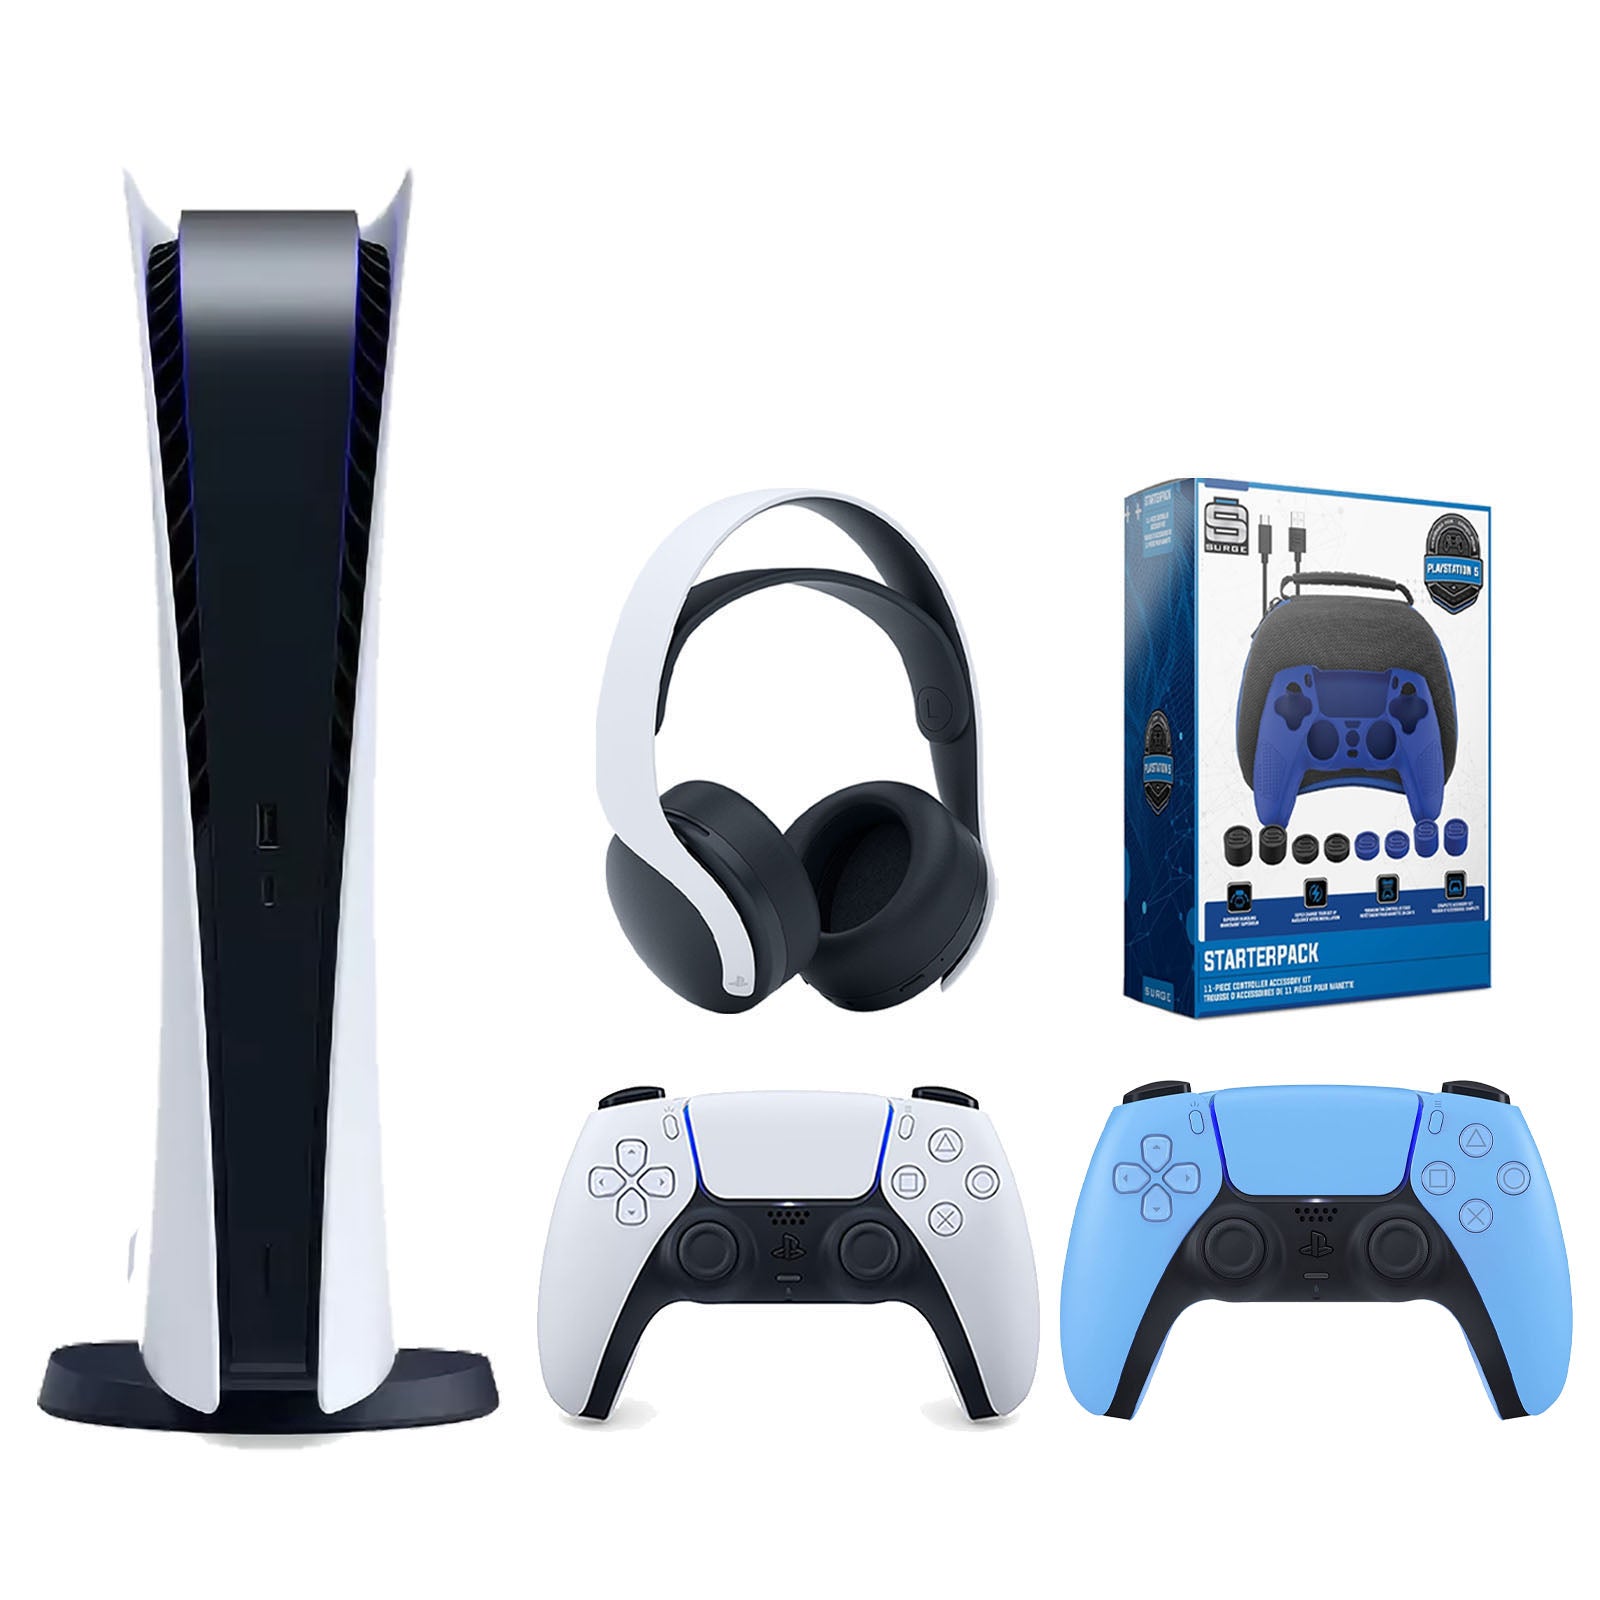 Sony Playstation 5 Digital Edition Console with Extra Blue Controller, White PULSE 3D Headset and Surge Pro Gamer Starter Pack 11-Piece Accessory Bundle - Pro-Distributing